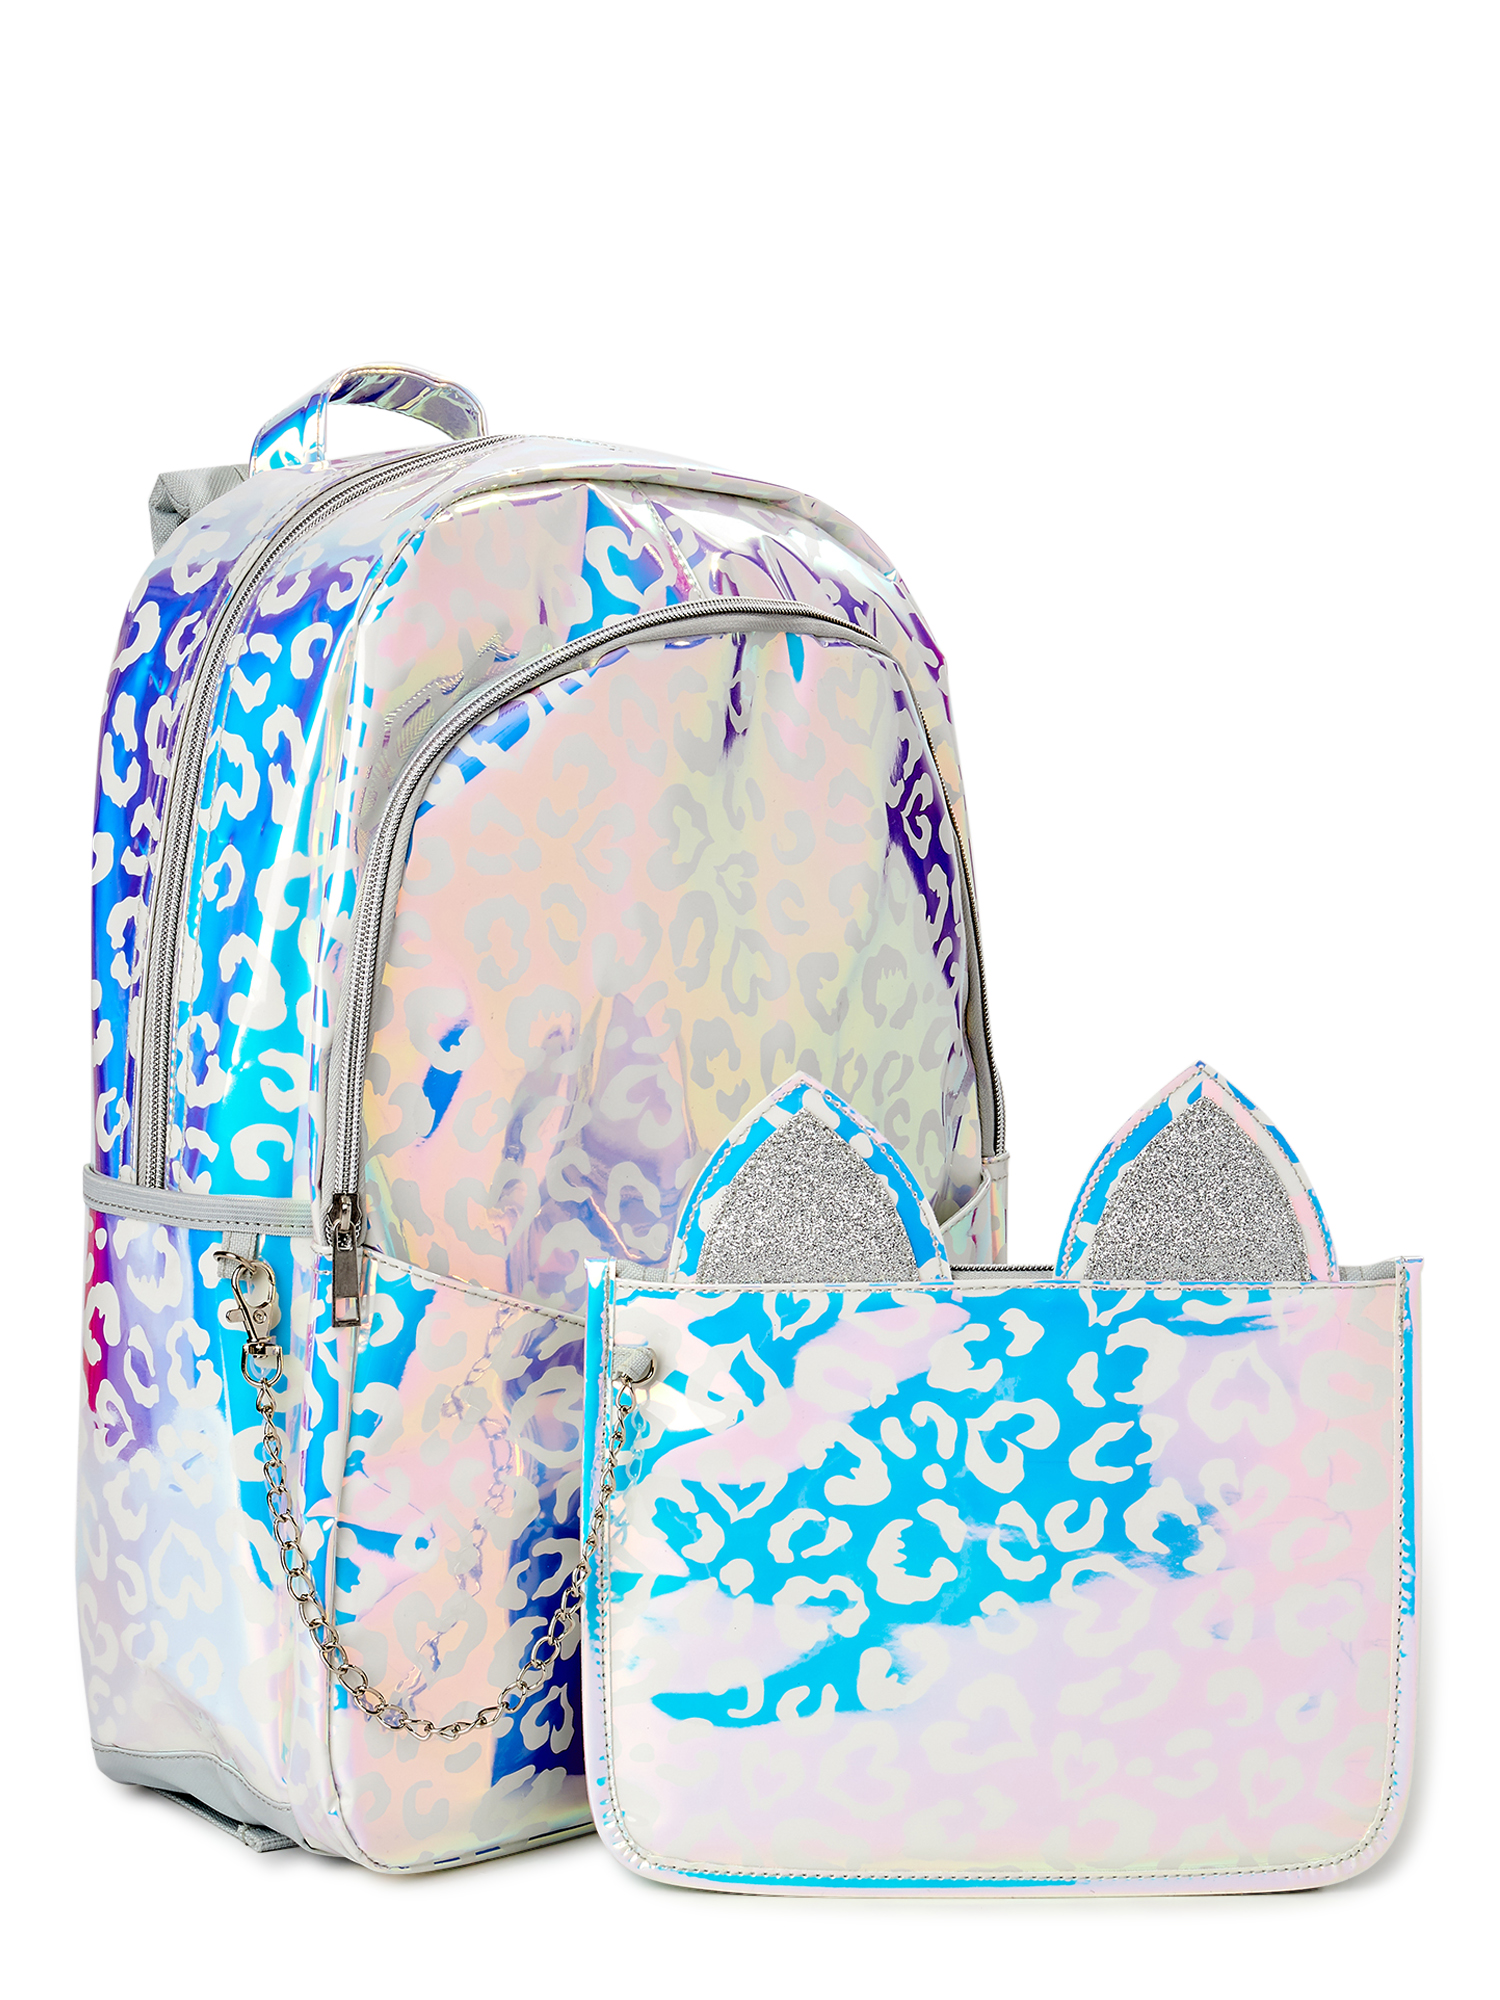 Wonder Nation Critters Iridescent Kitty Backpack Set, 2-Piece - image 3 of 6